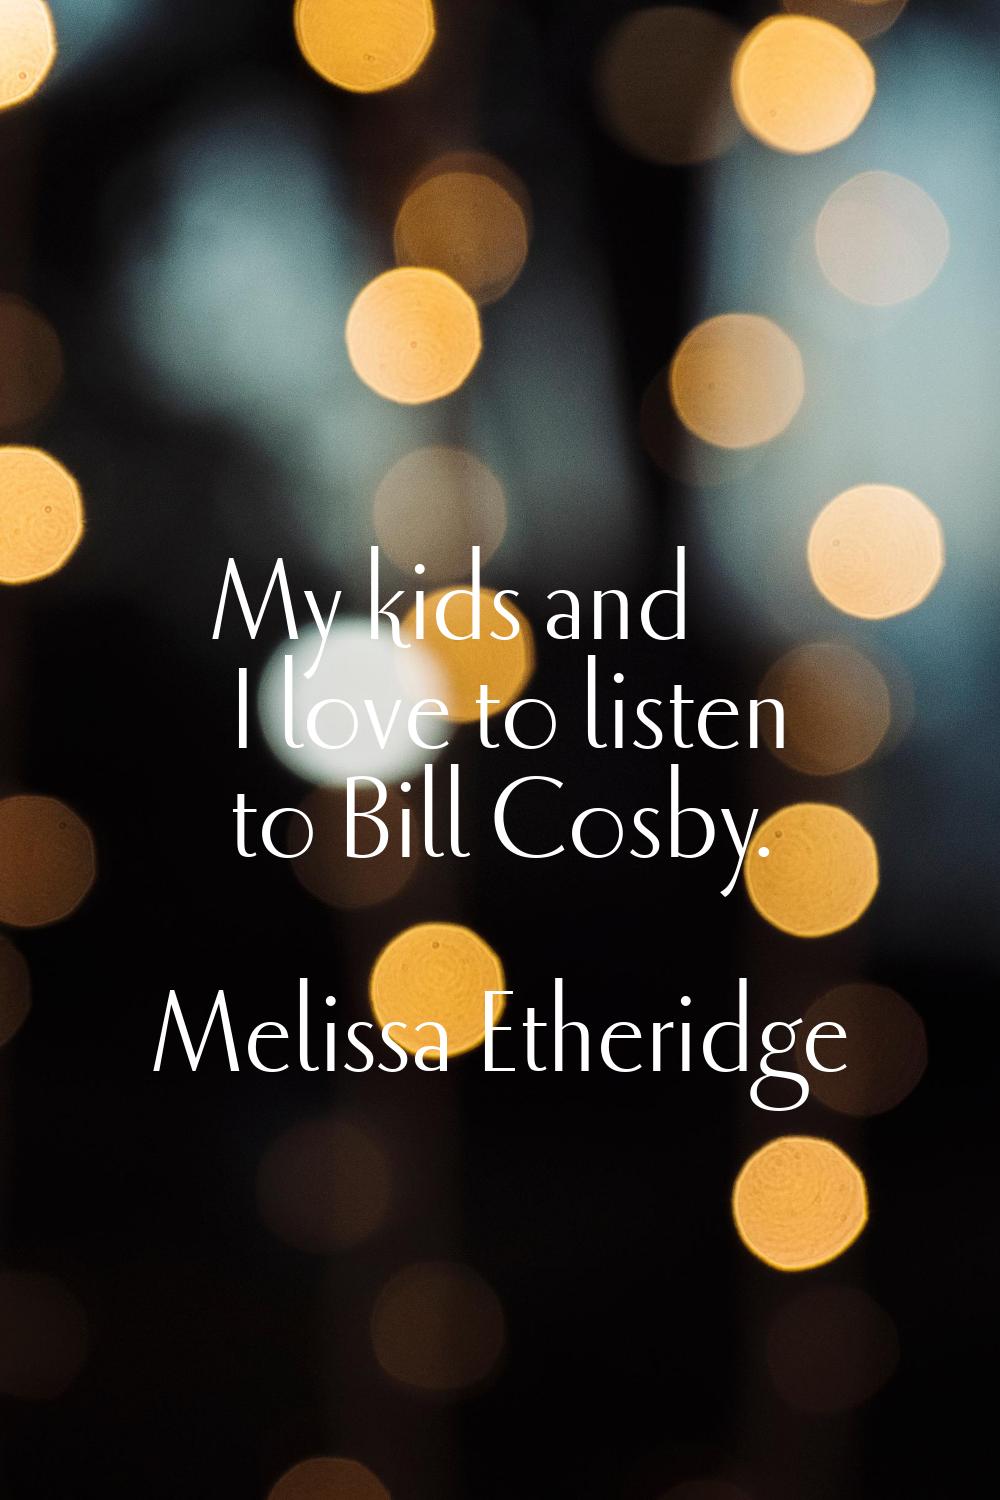 My kids and I love to listen to Bill Cosby.